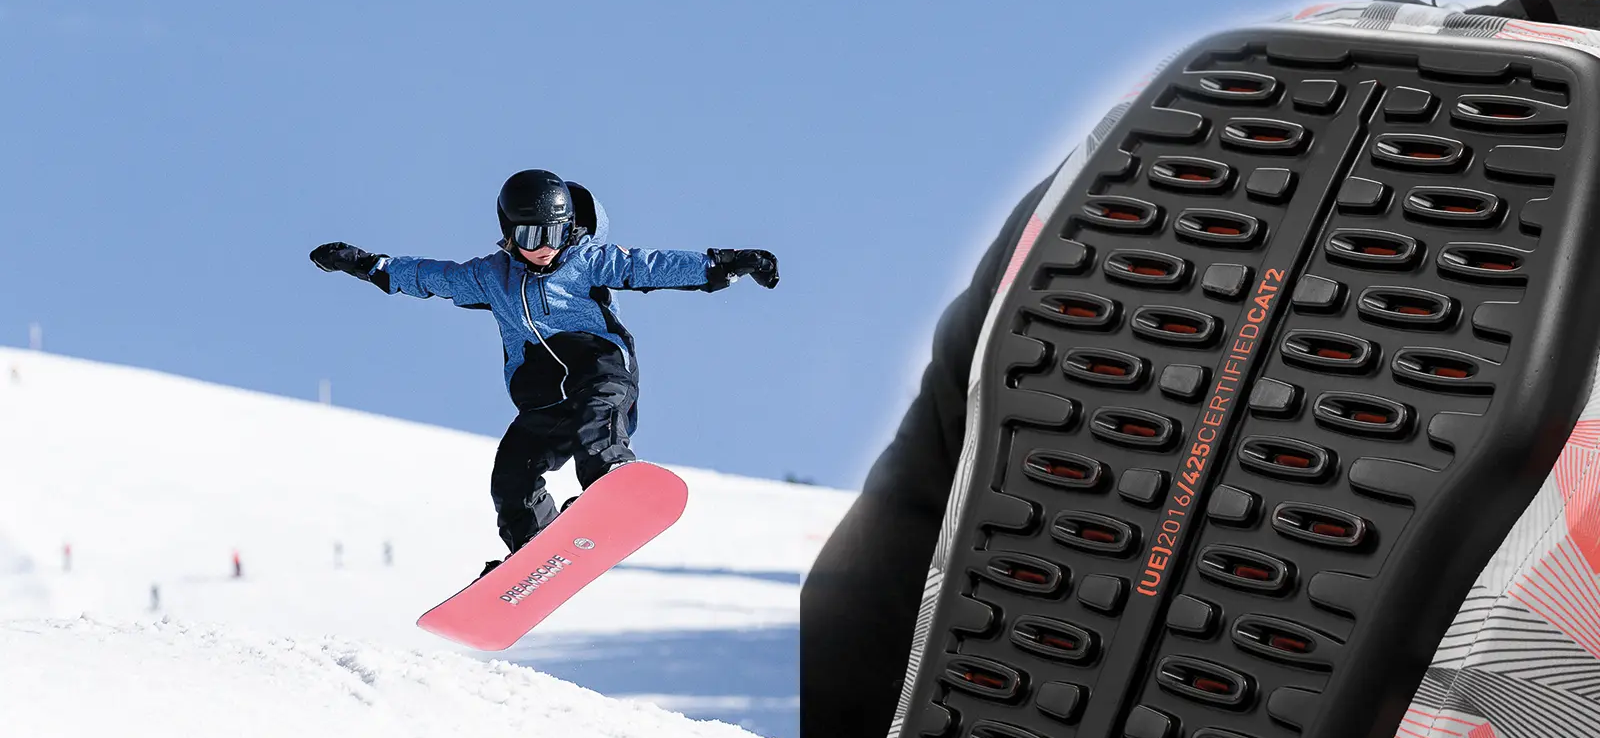 How to choose kids' ski and snowboard back protection?